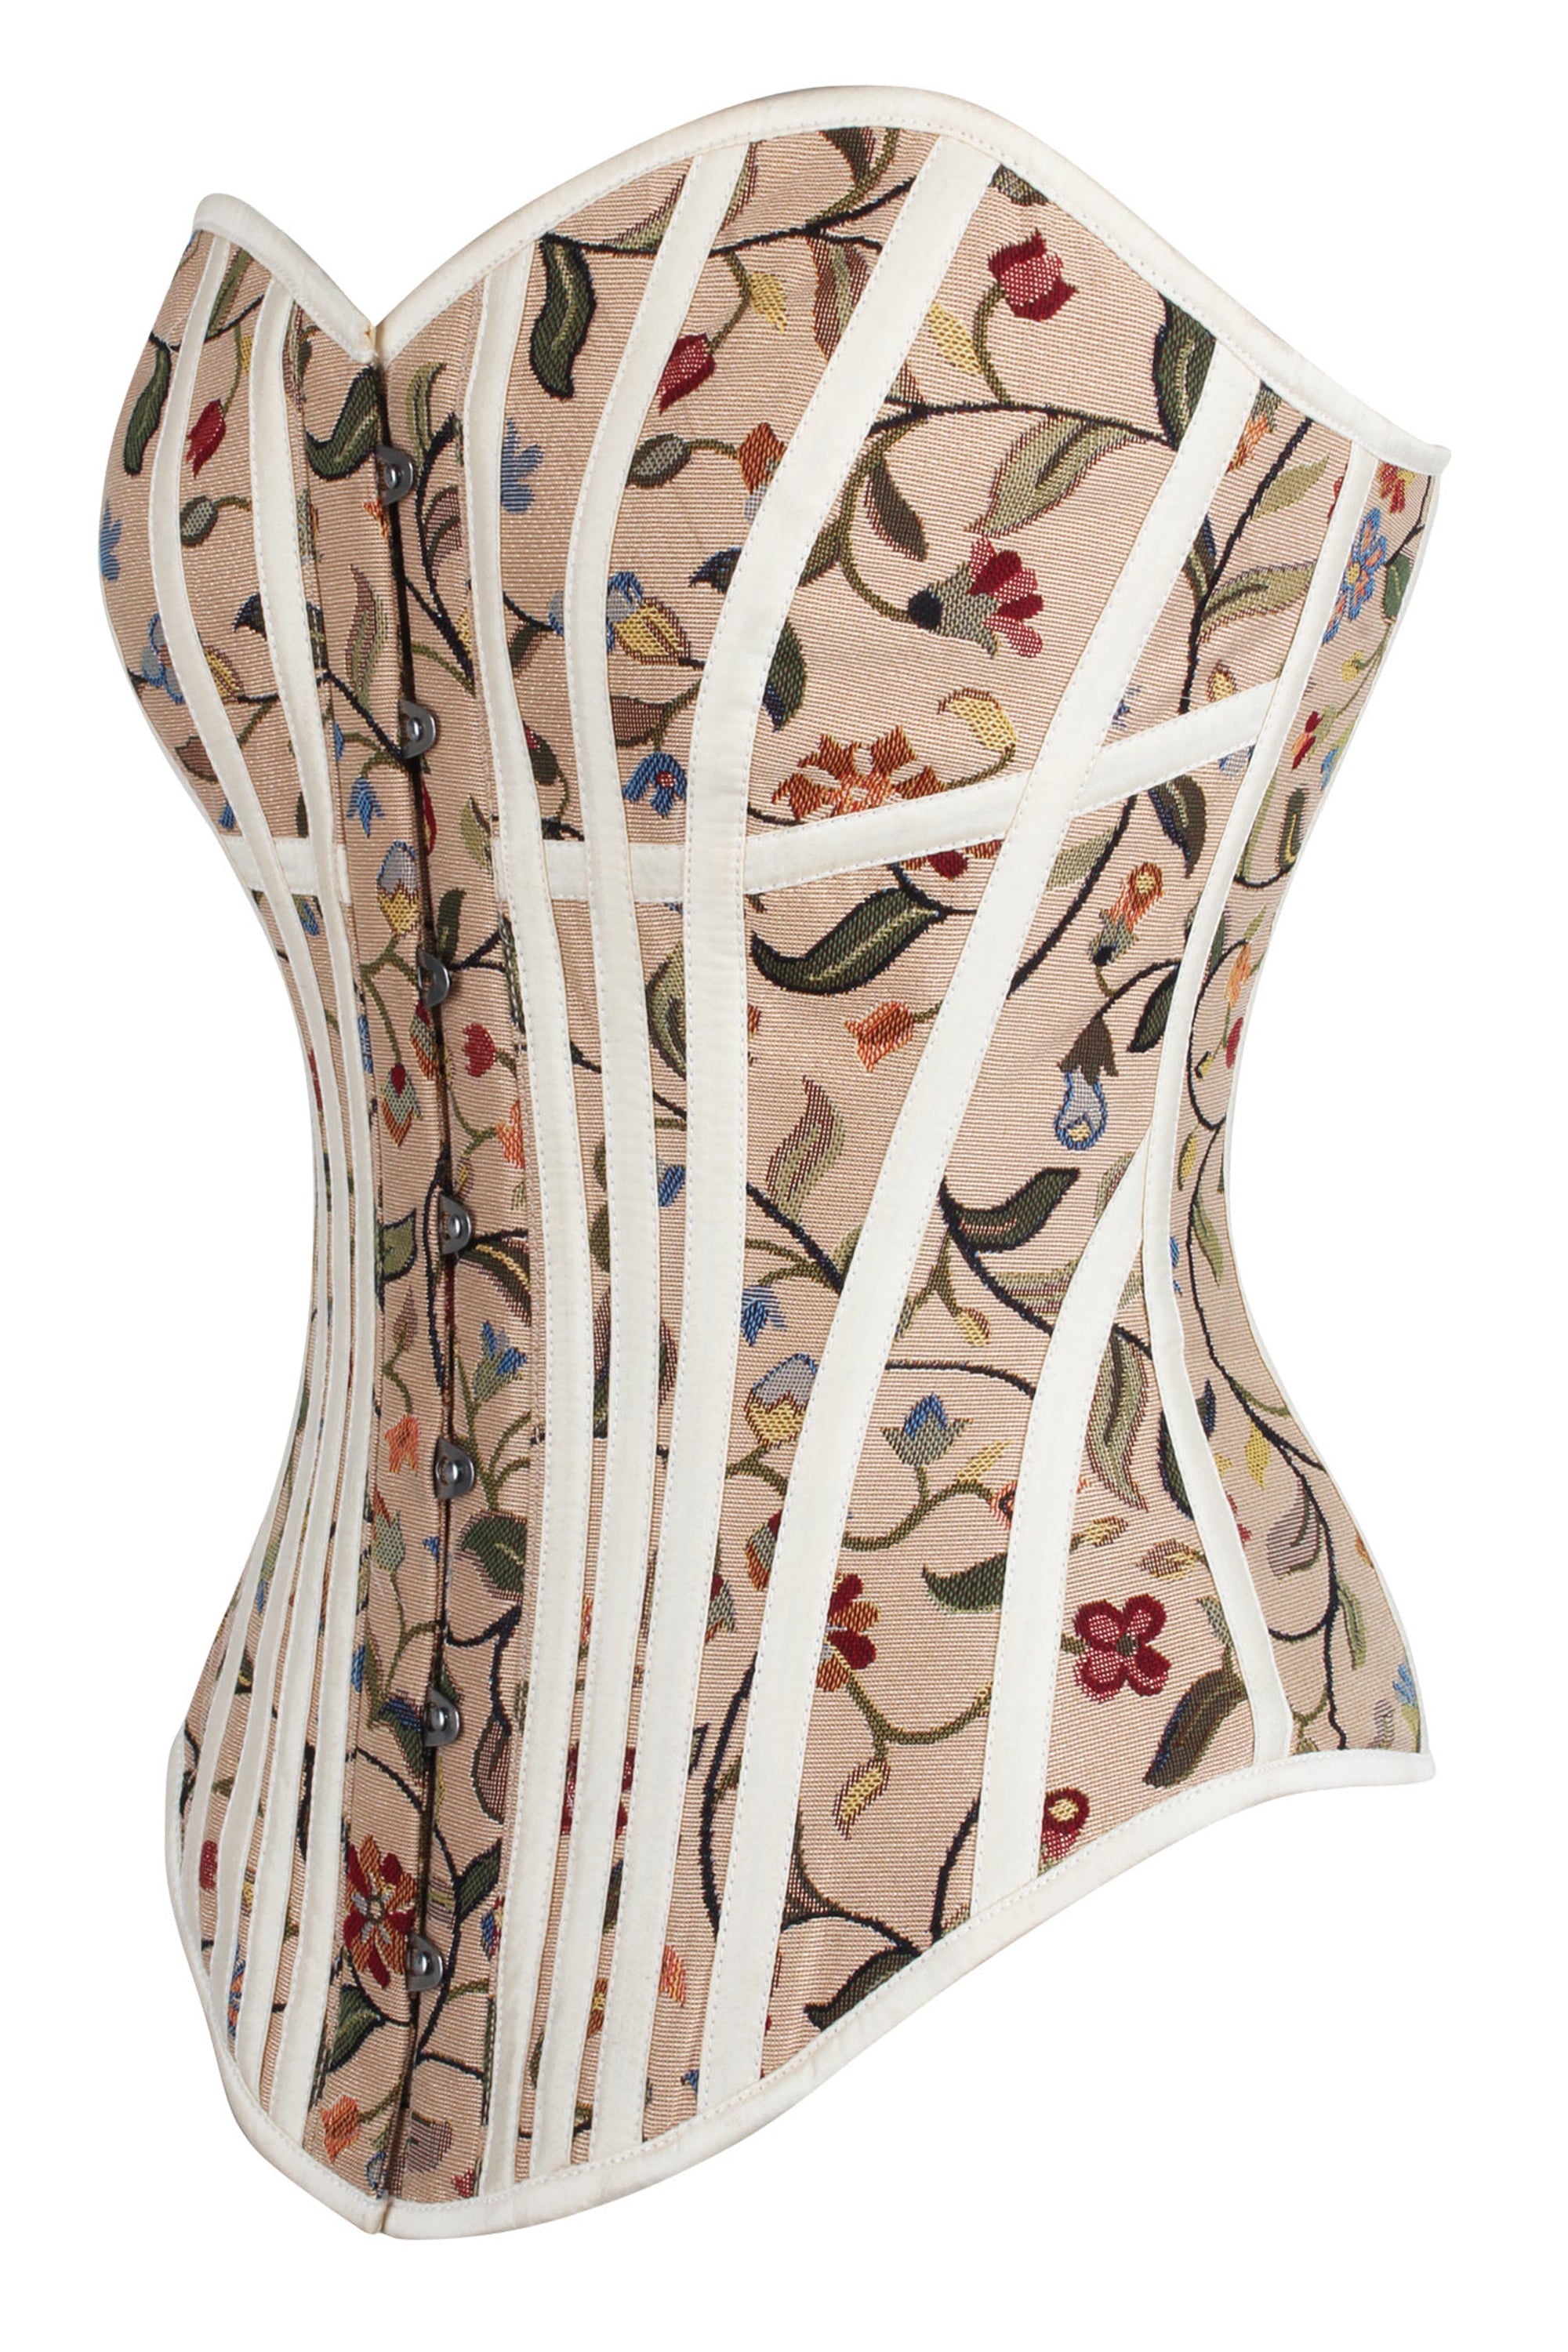 Historically Inspired Floral Print Overbust Corset